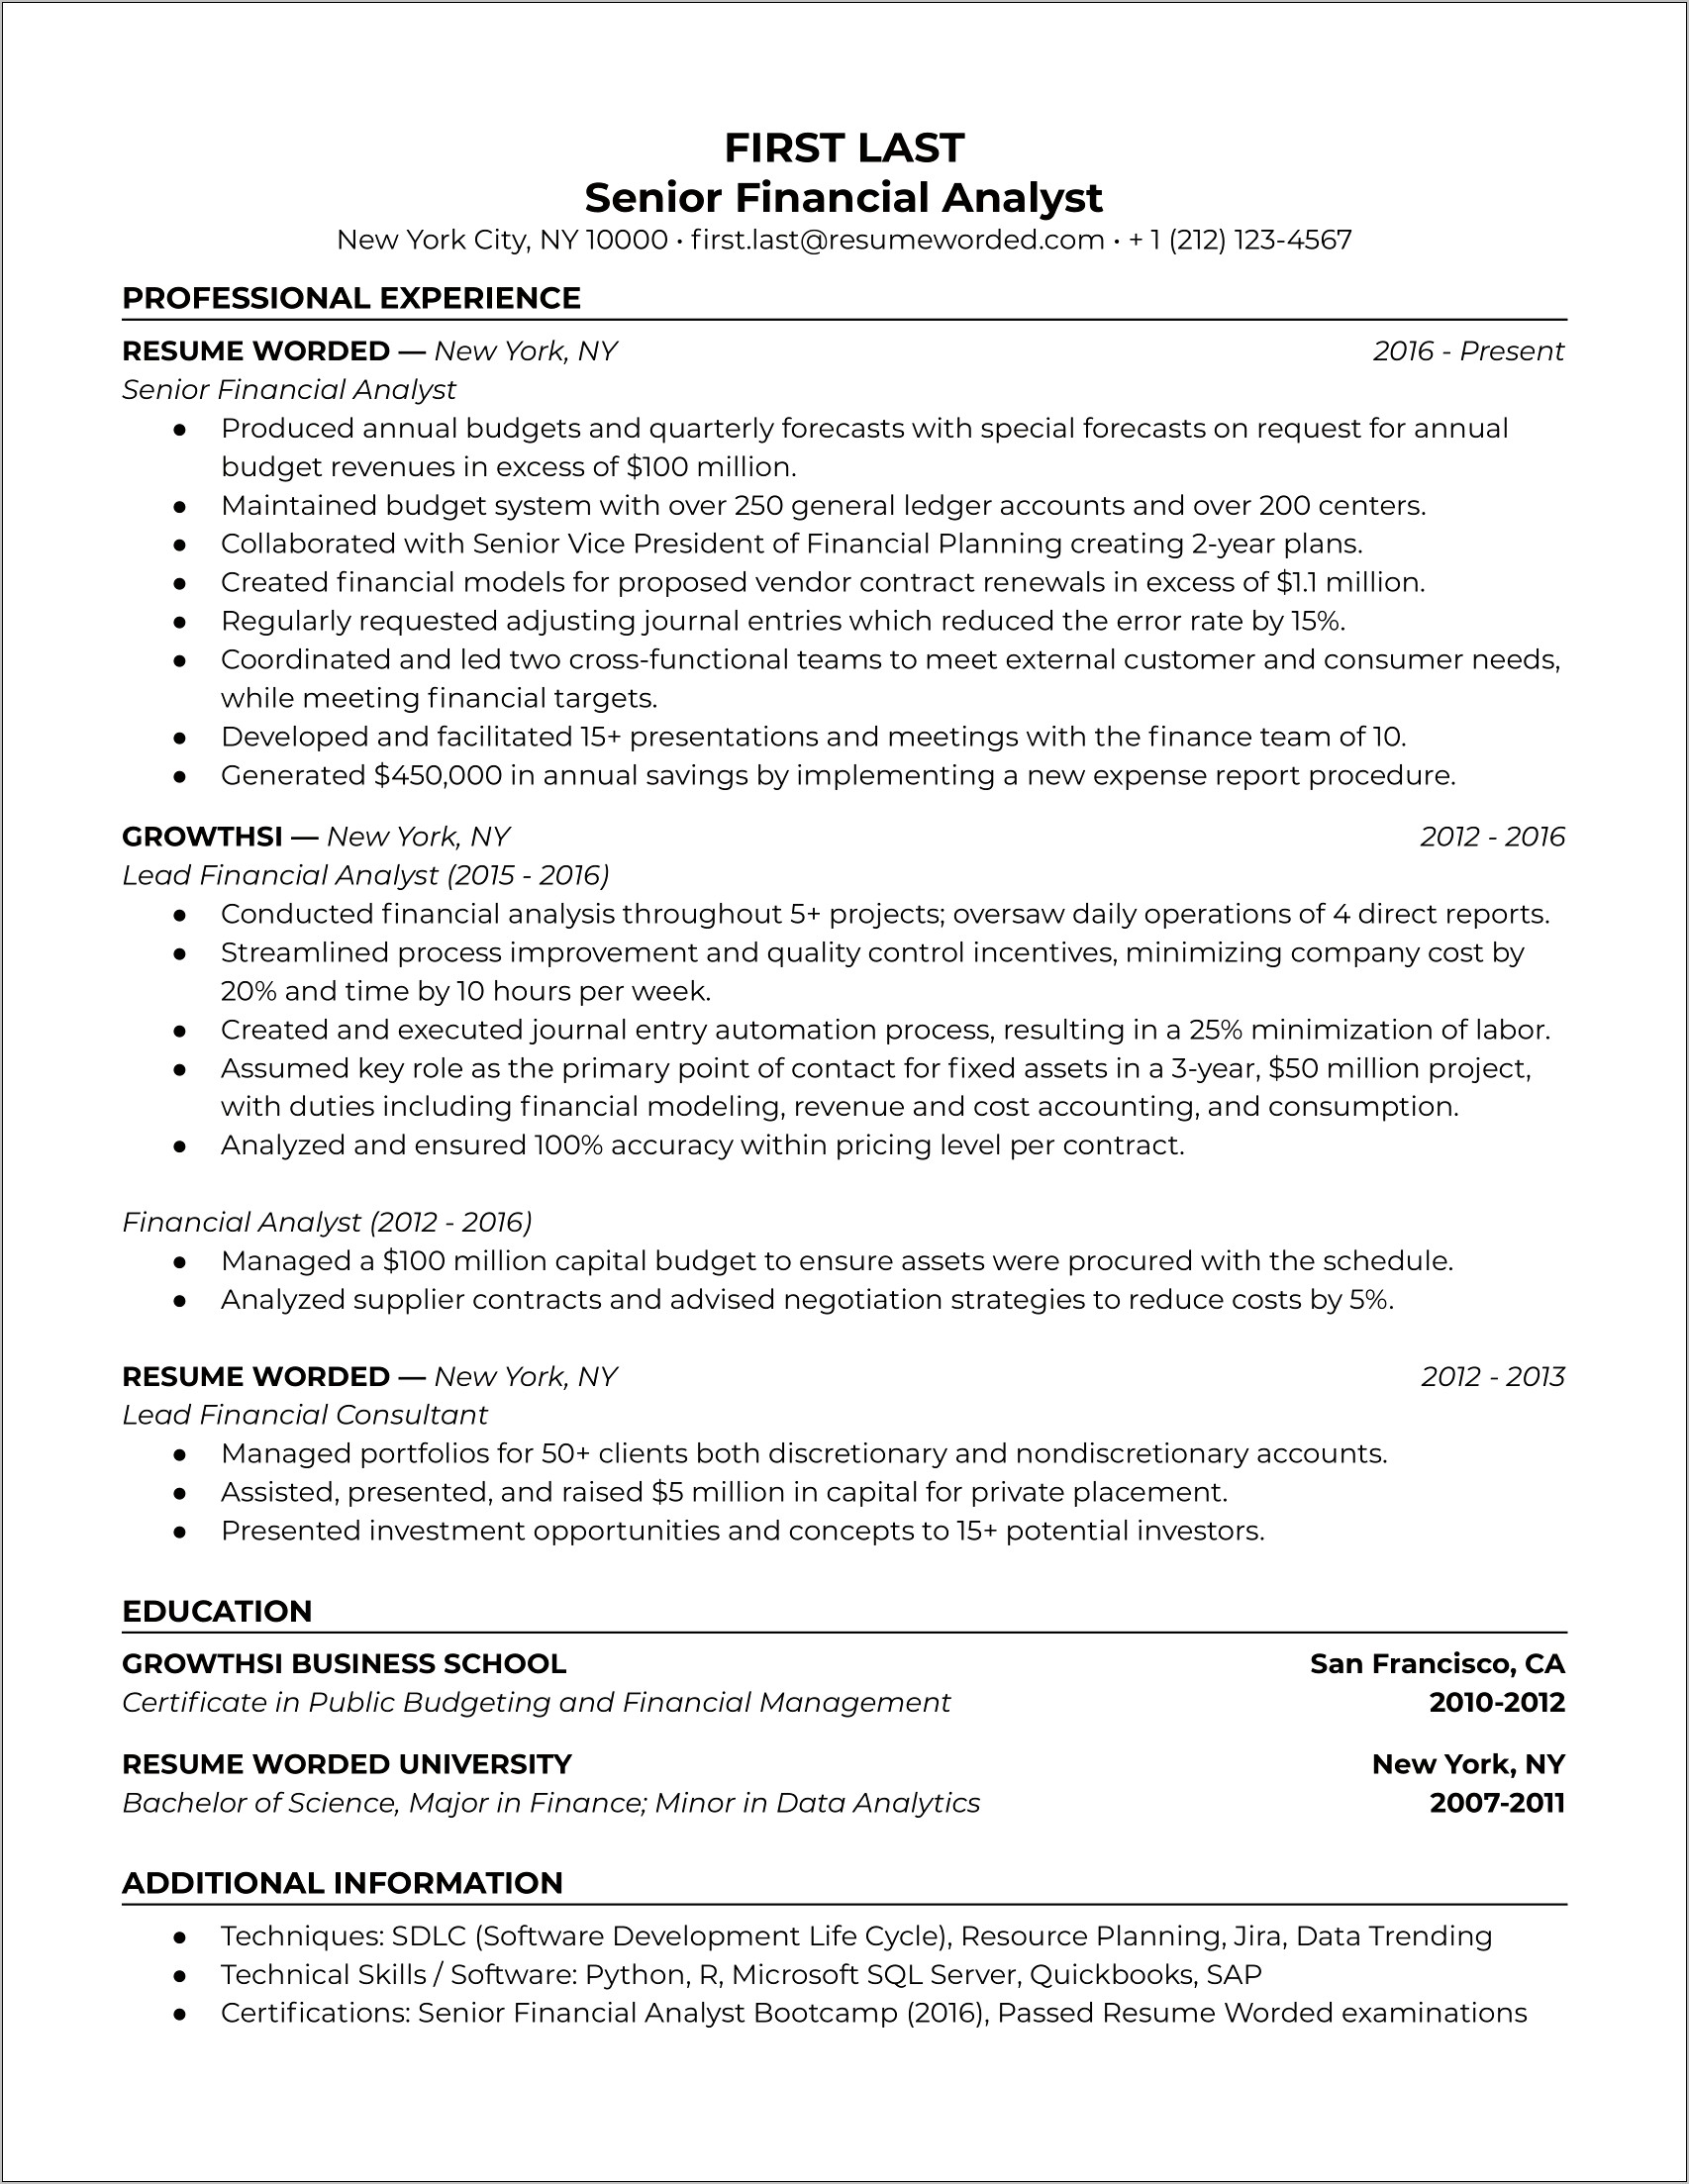 Financial Analyst Project Experience Resume Examples